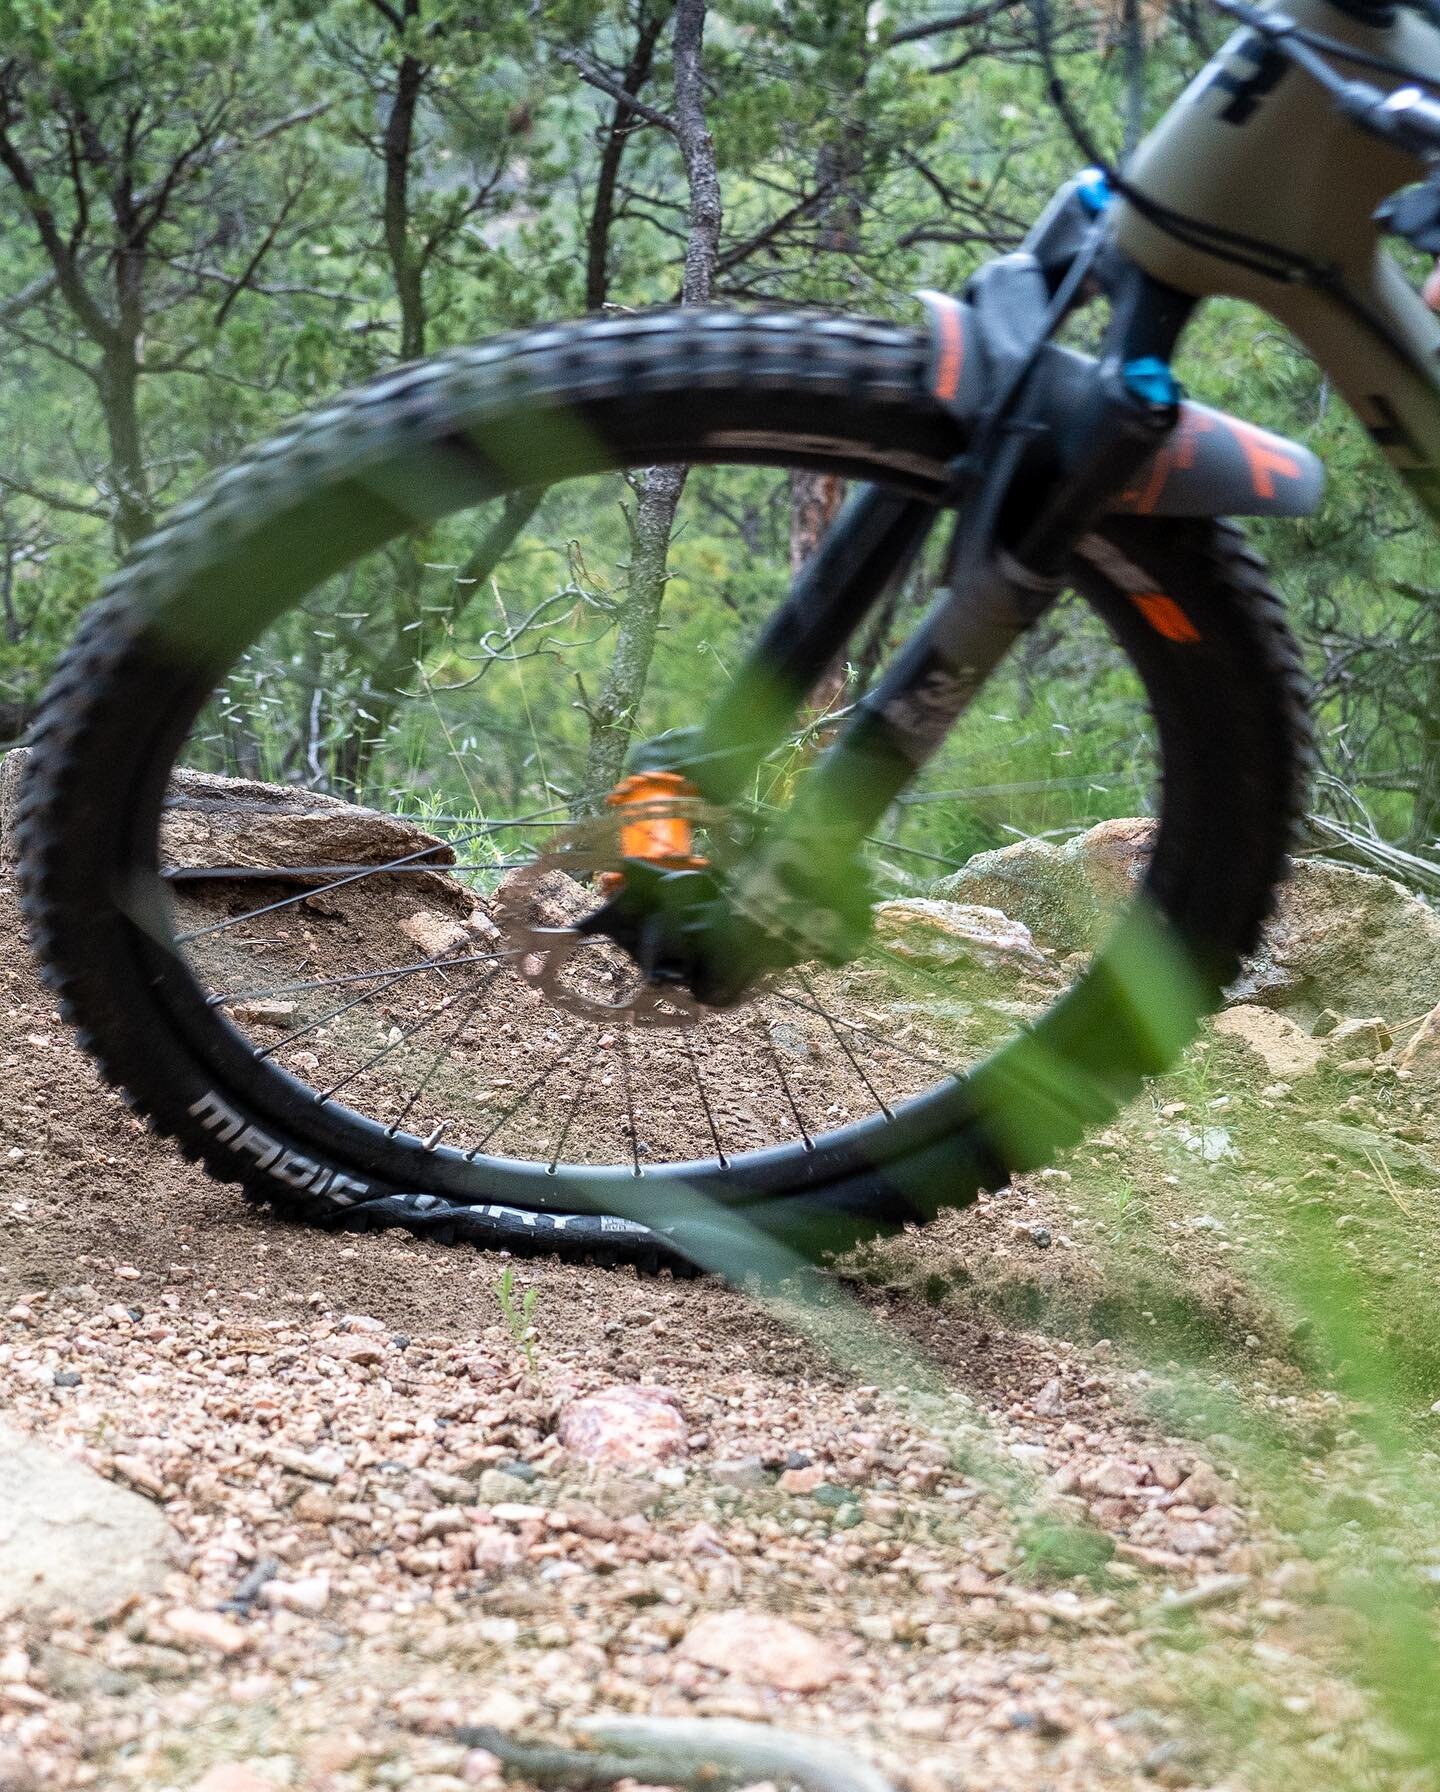 One of the little gems I look for when editing mountain bike photos is seeing how a high shutter speed can capture the deformation of tires as a skilled rider pushes the bike through a corner. 
&bull;
&bull;
&bull;
#twowheeltuesday #mtb #iridenm #sch